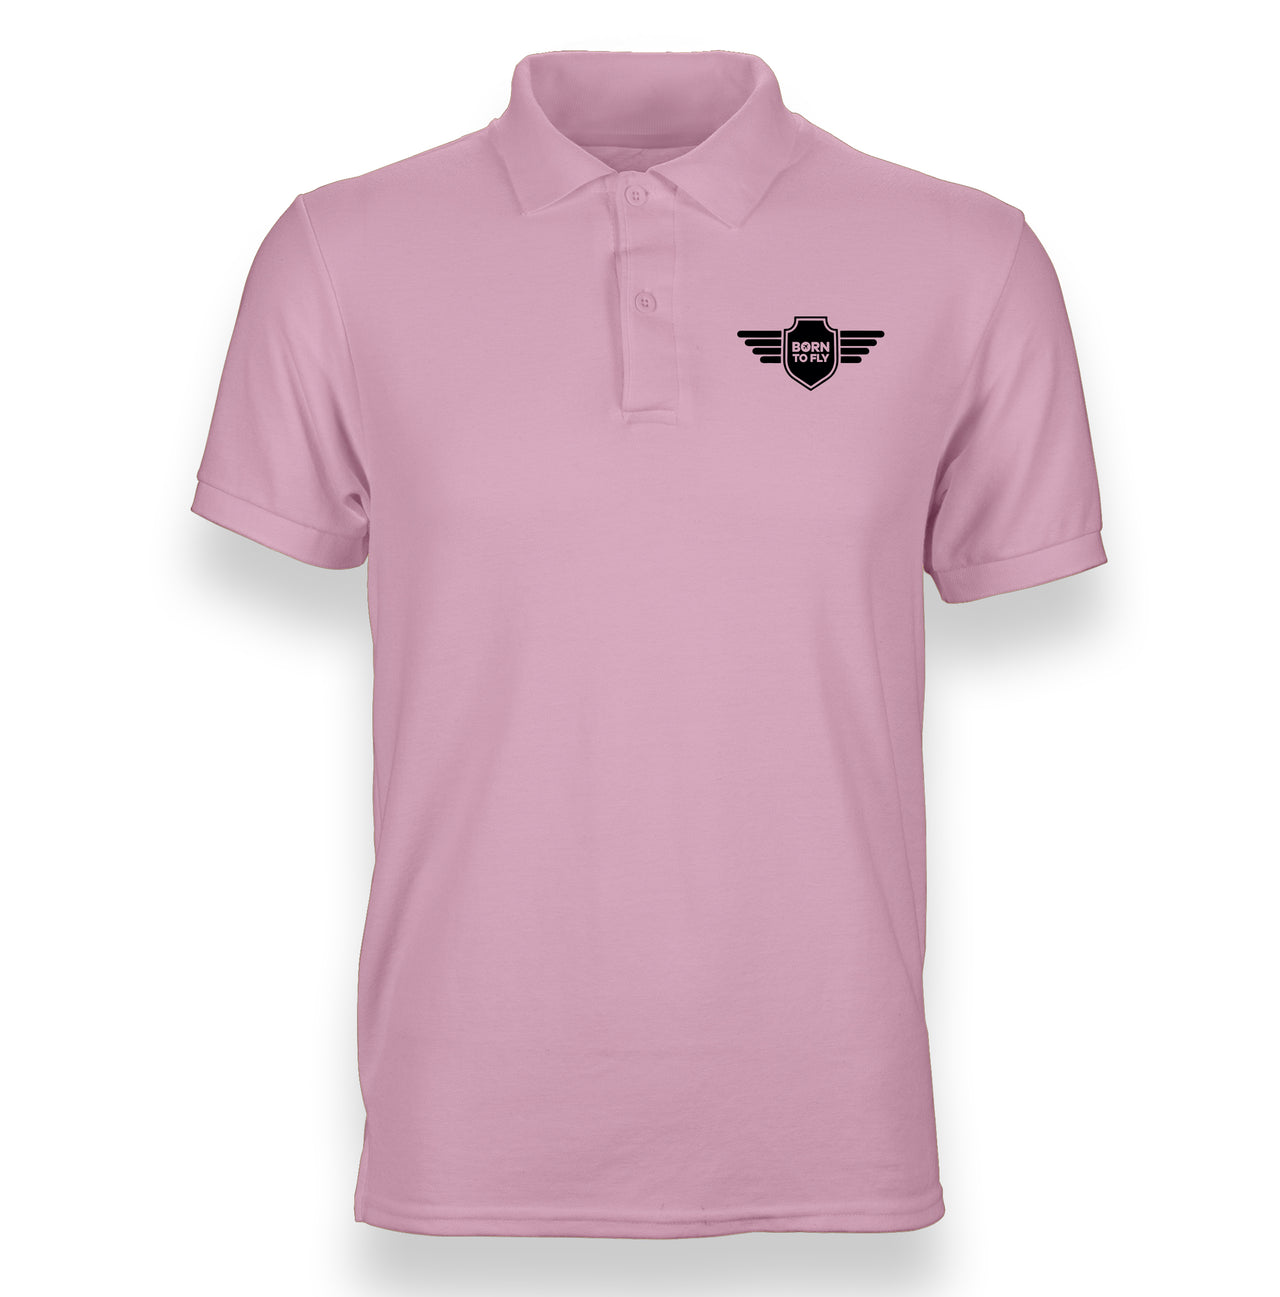 Born To Fly & Badge Designed "WOMEN" Polo T-Shirts